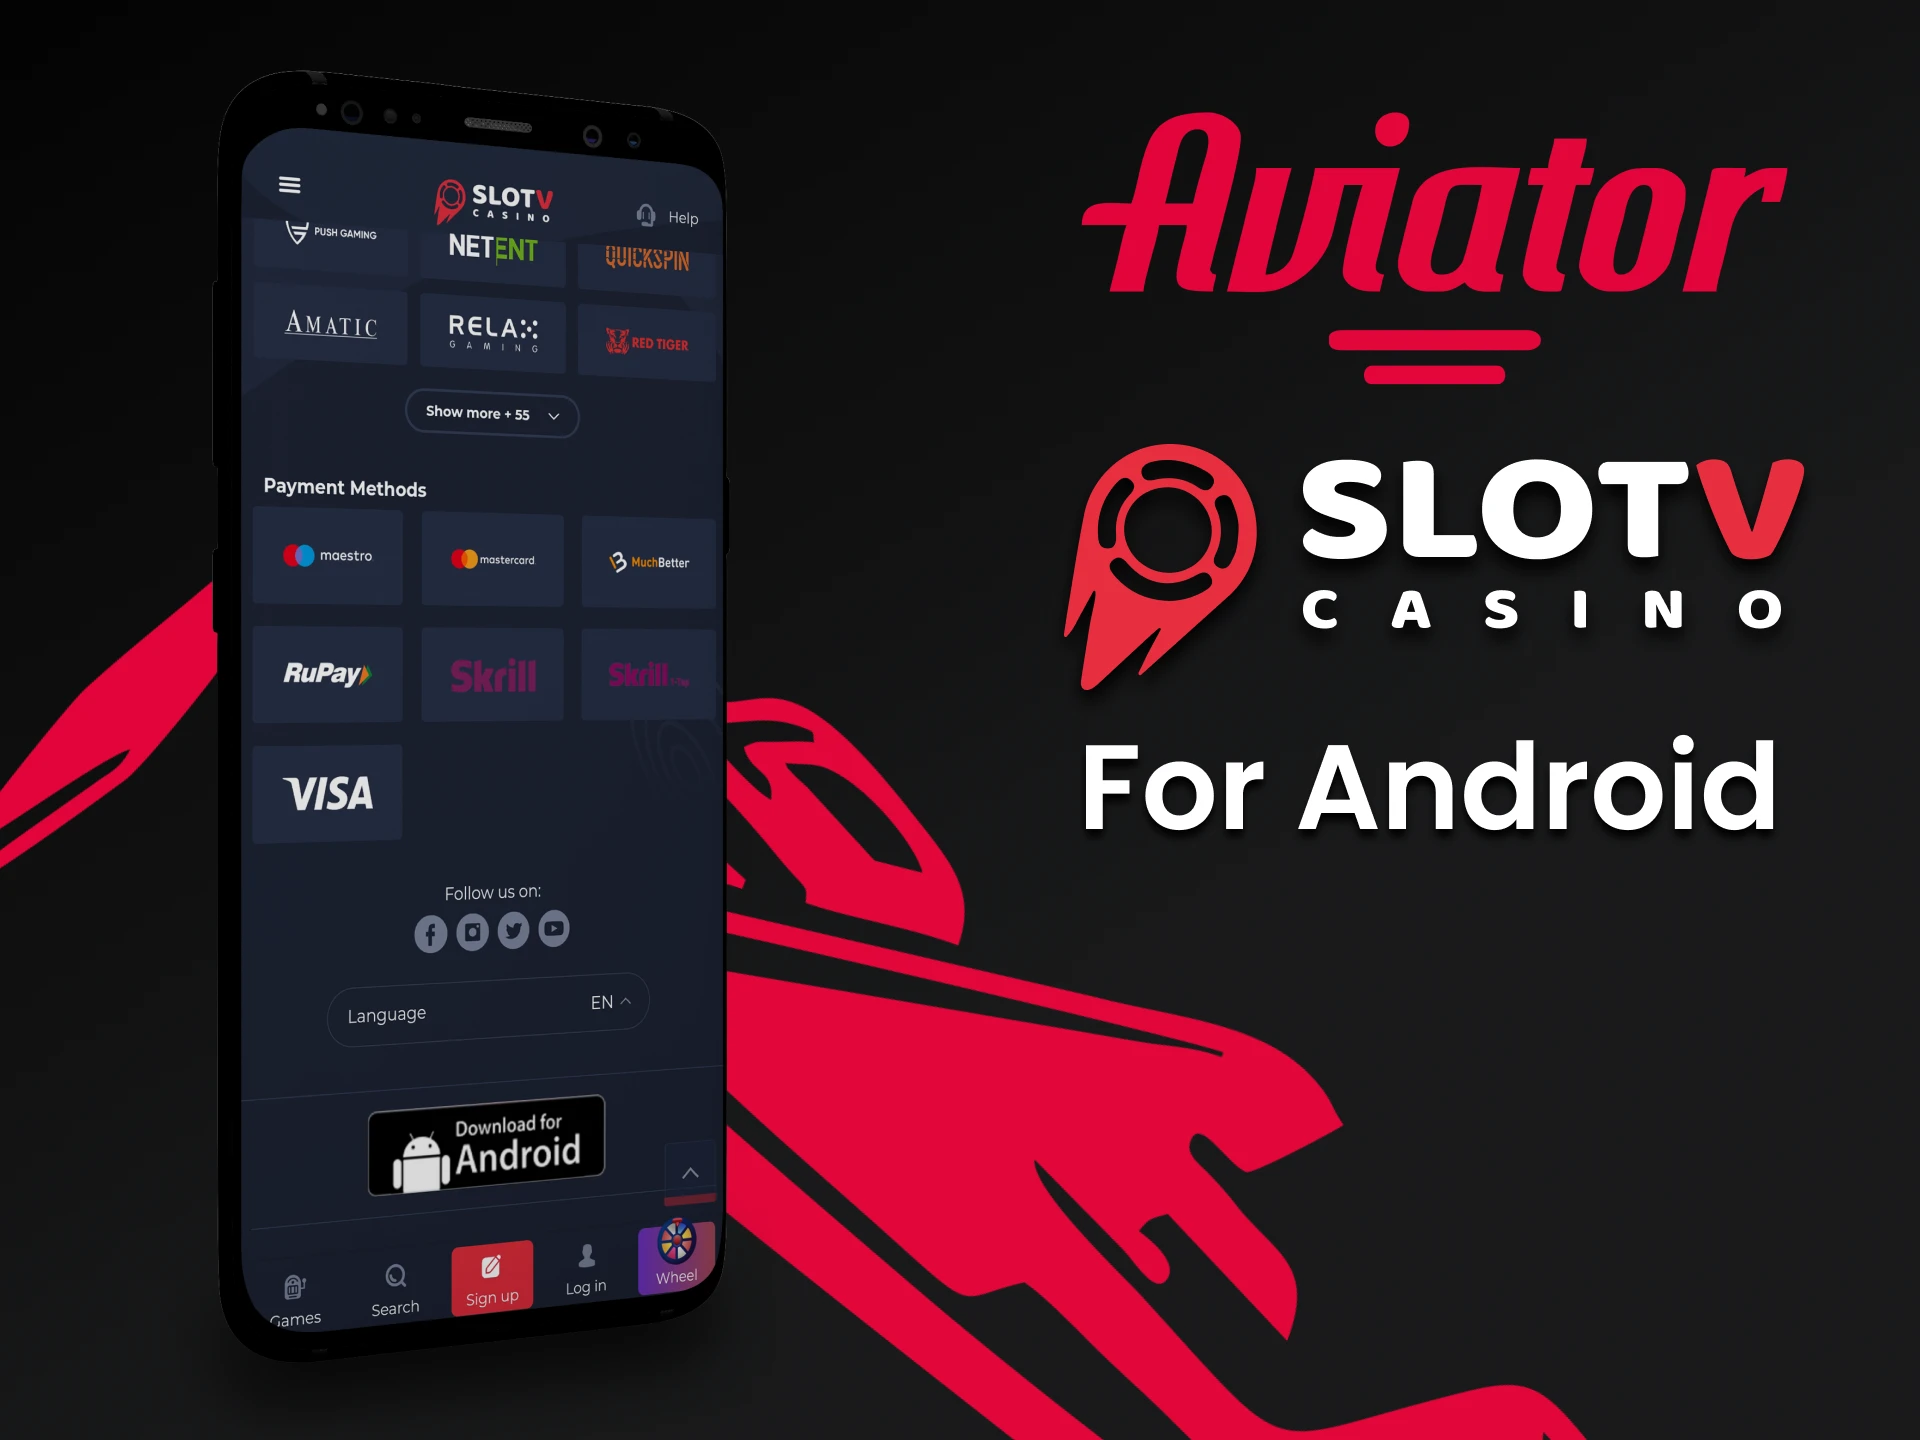 Install the SlotV app on Android to play Aviator.